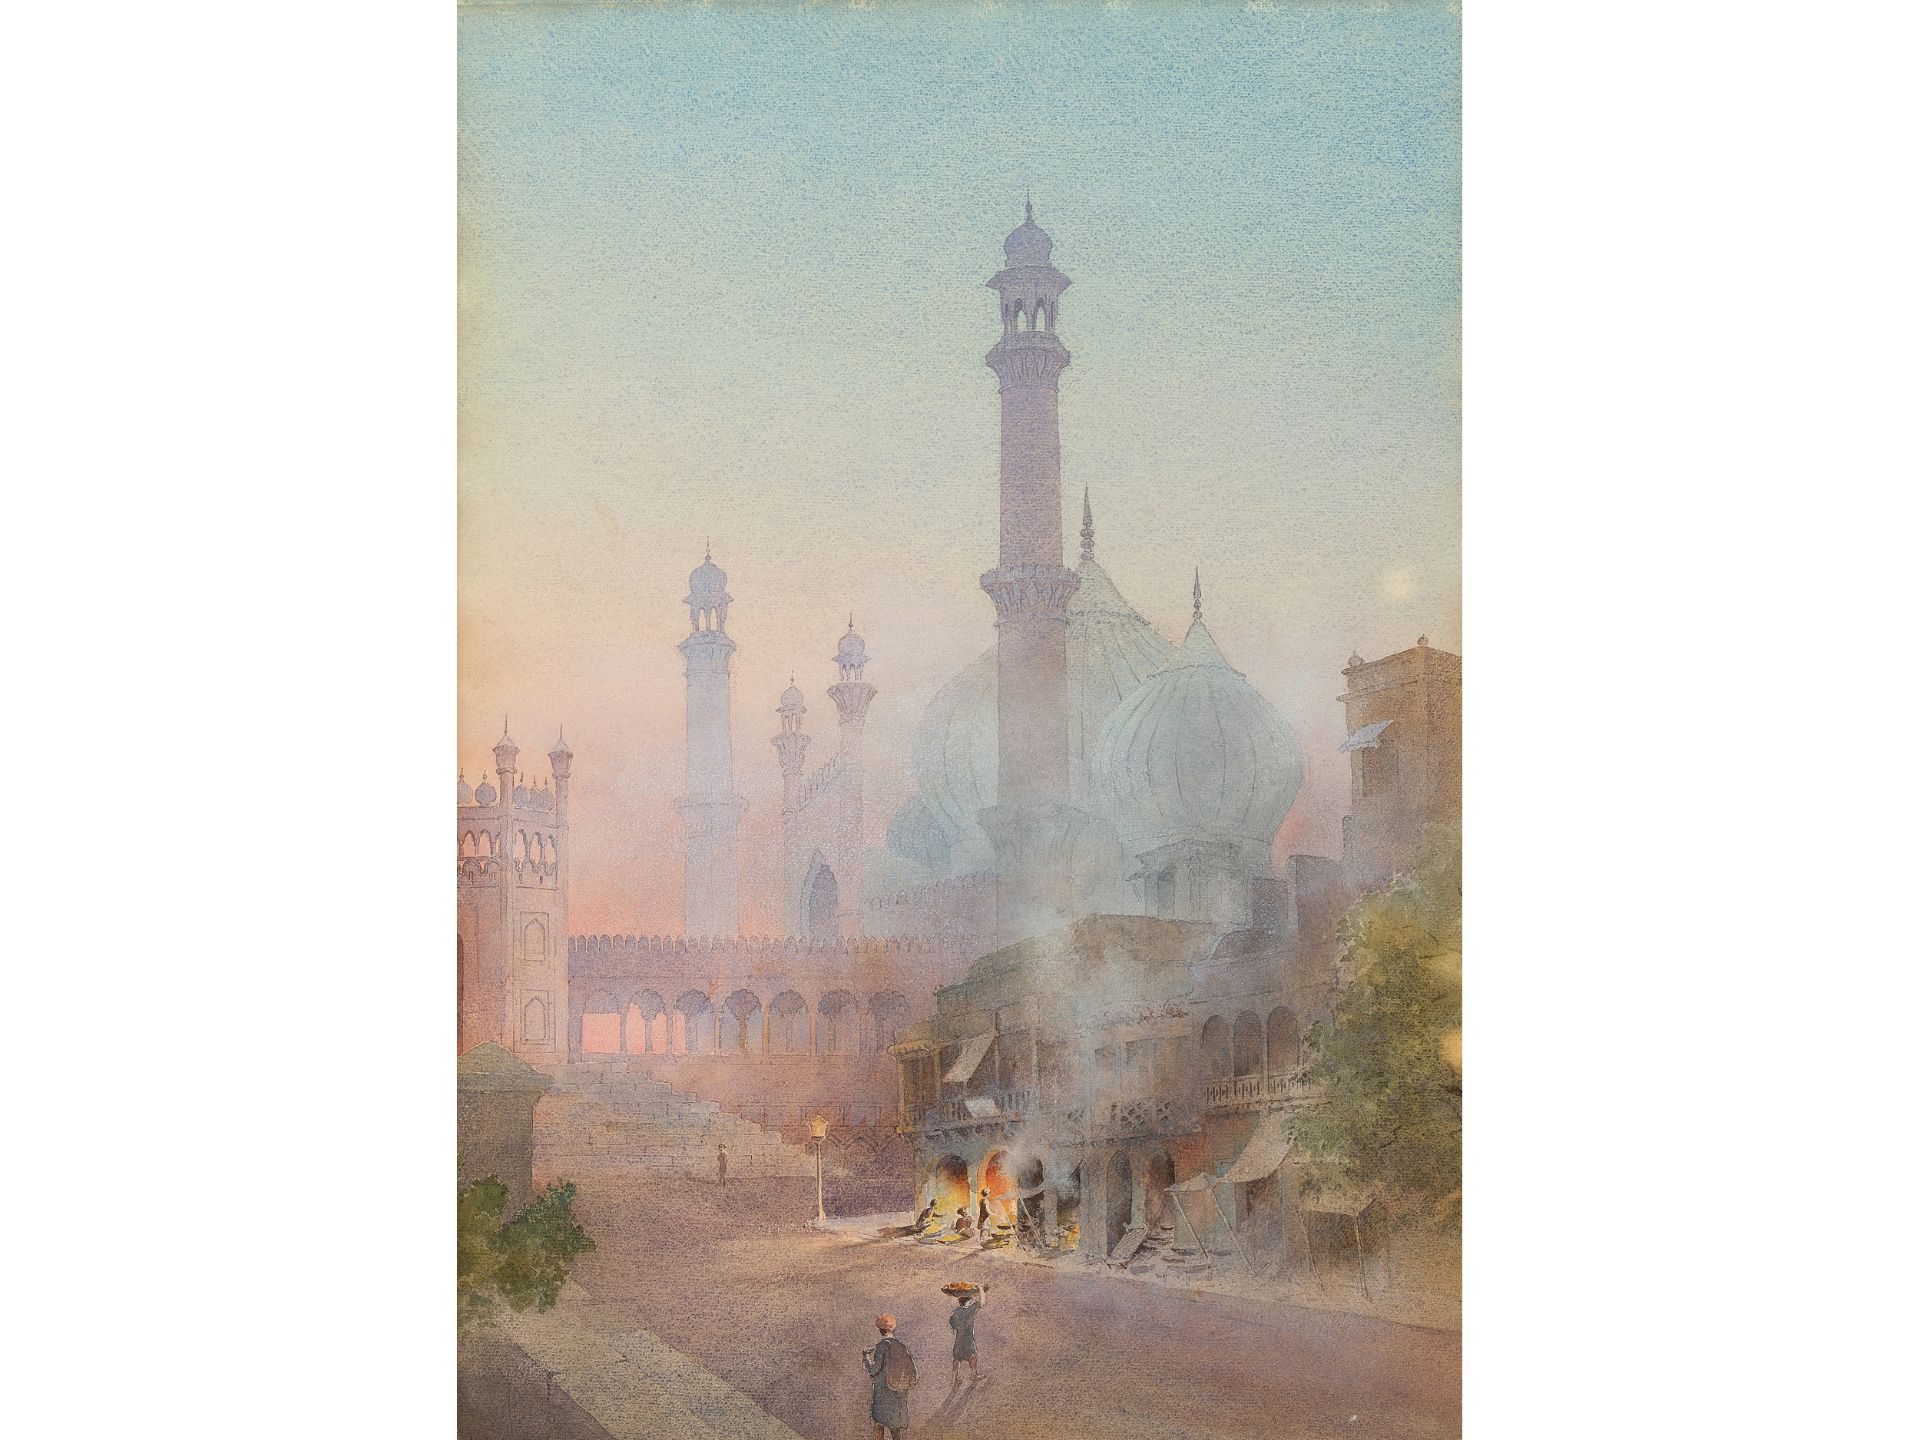 Sunrise in the Orient, Watercolour on paper